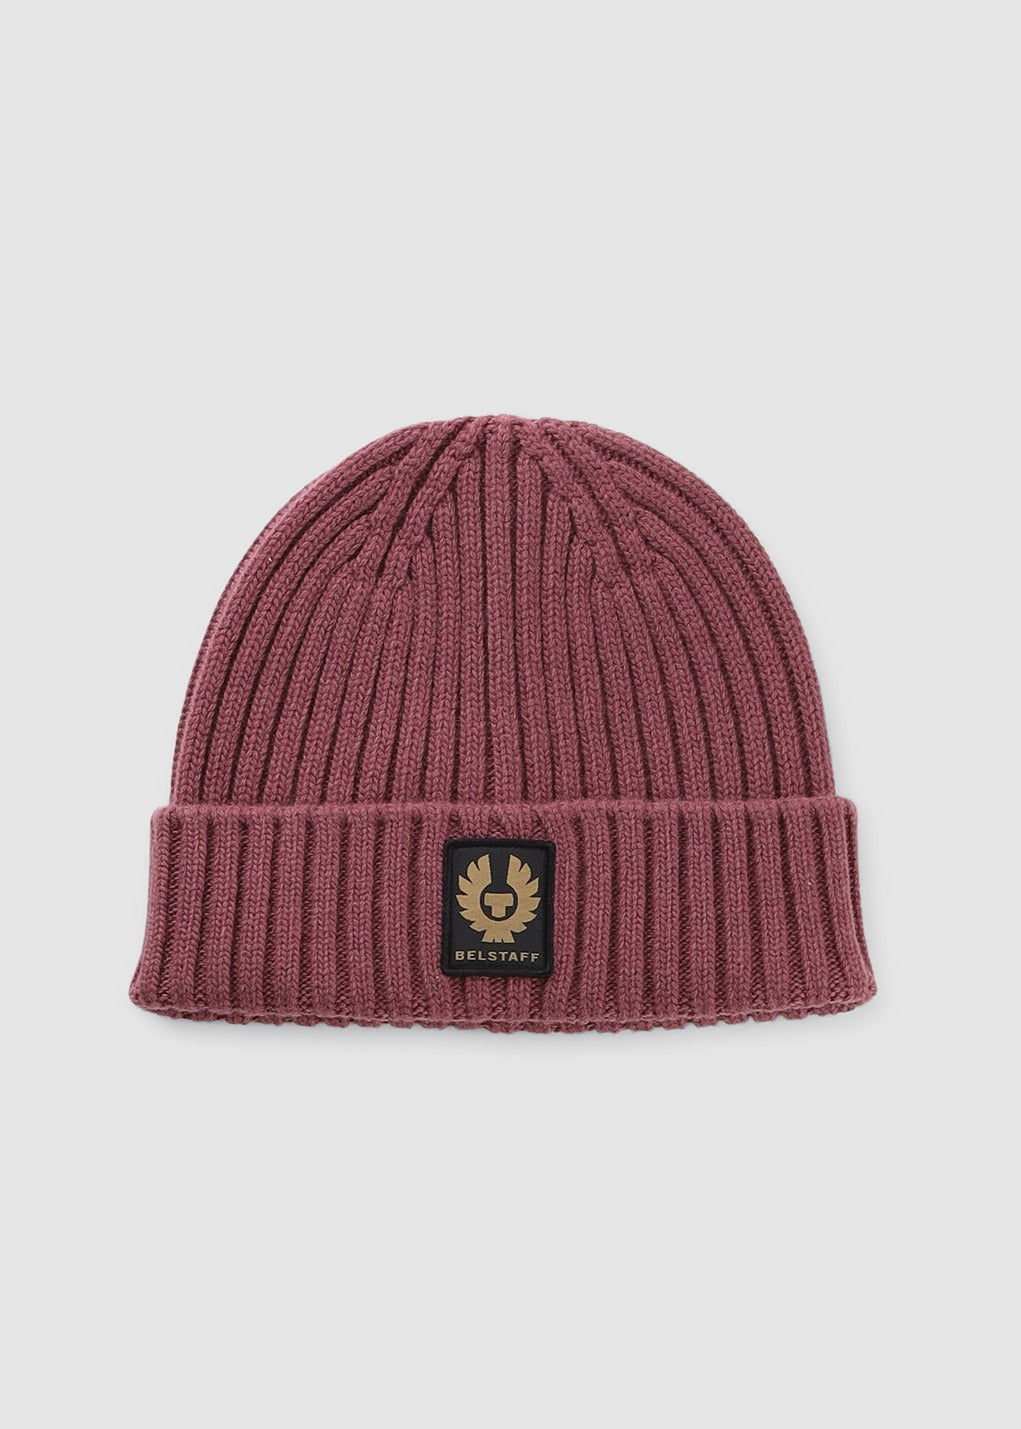 Image of Belstaff Mens Watch Beanie Hat In Mulberry